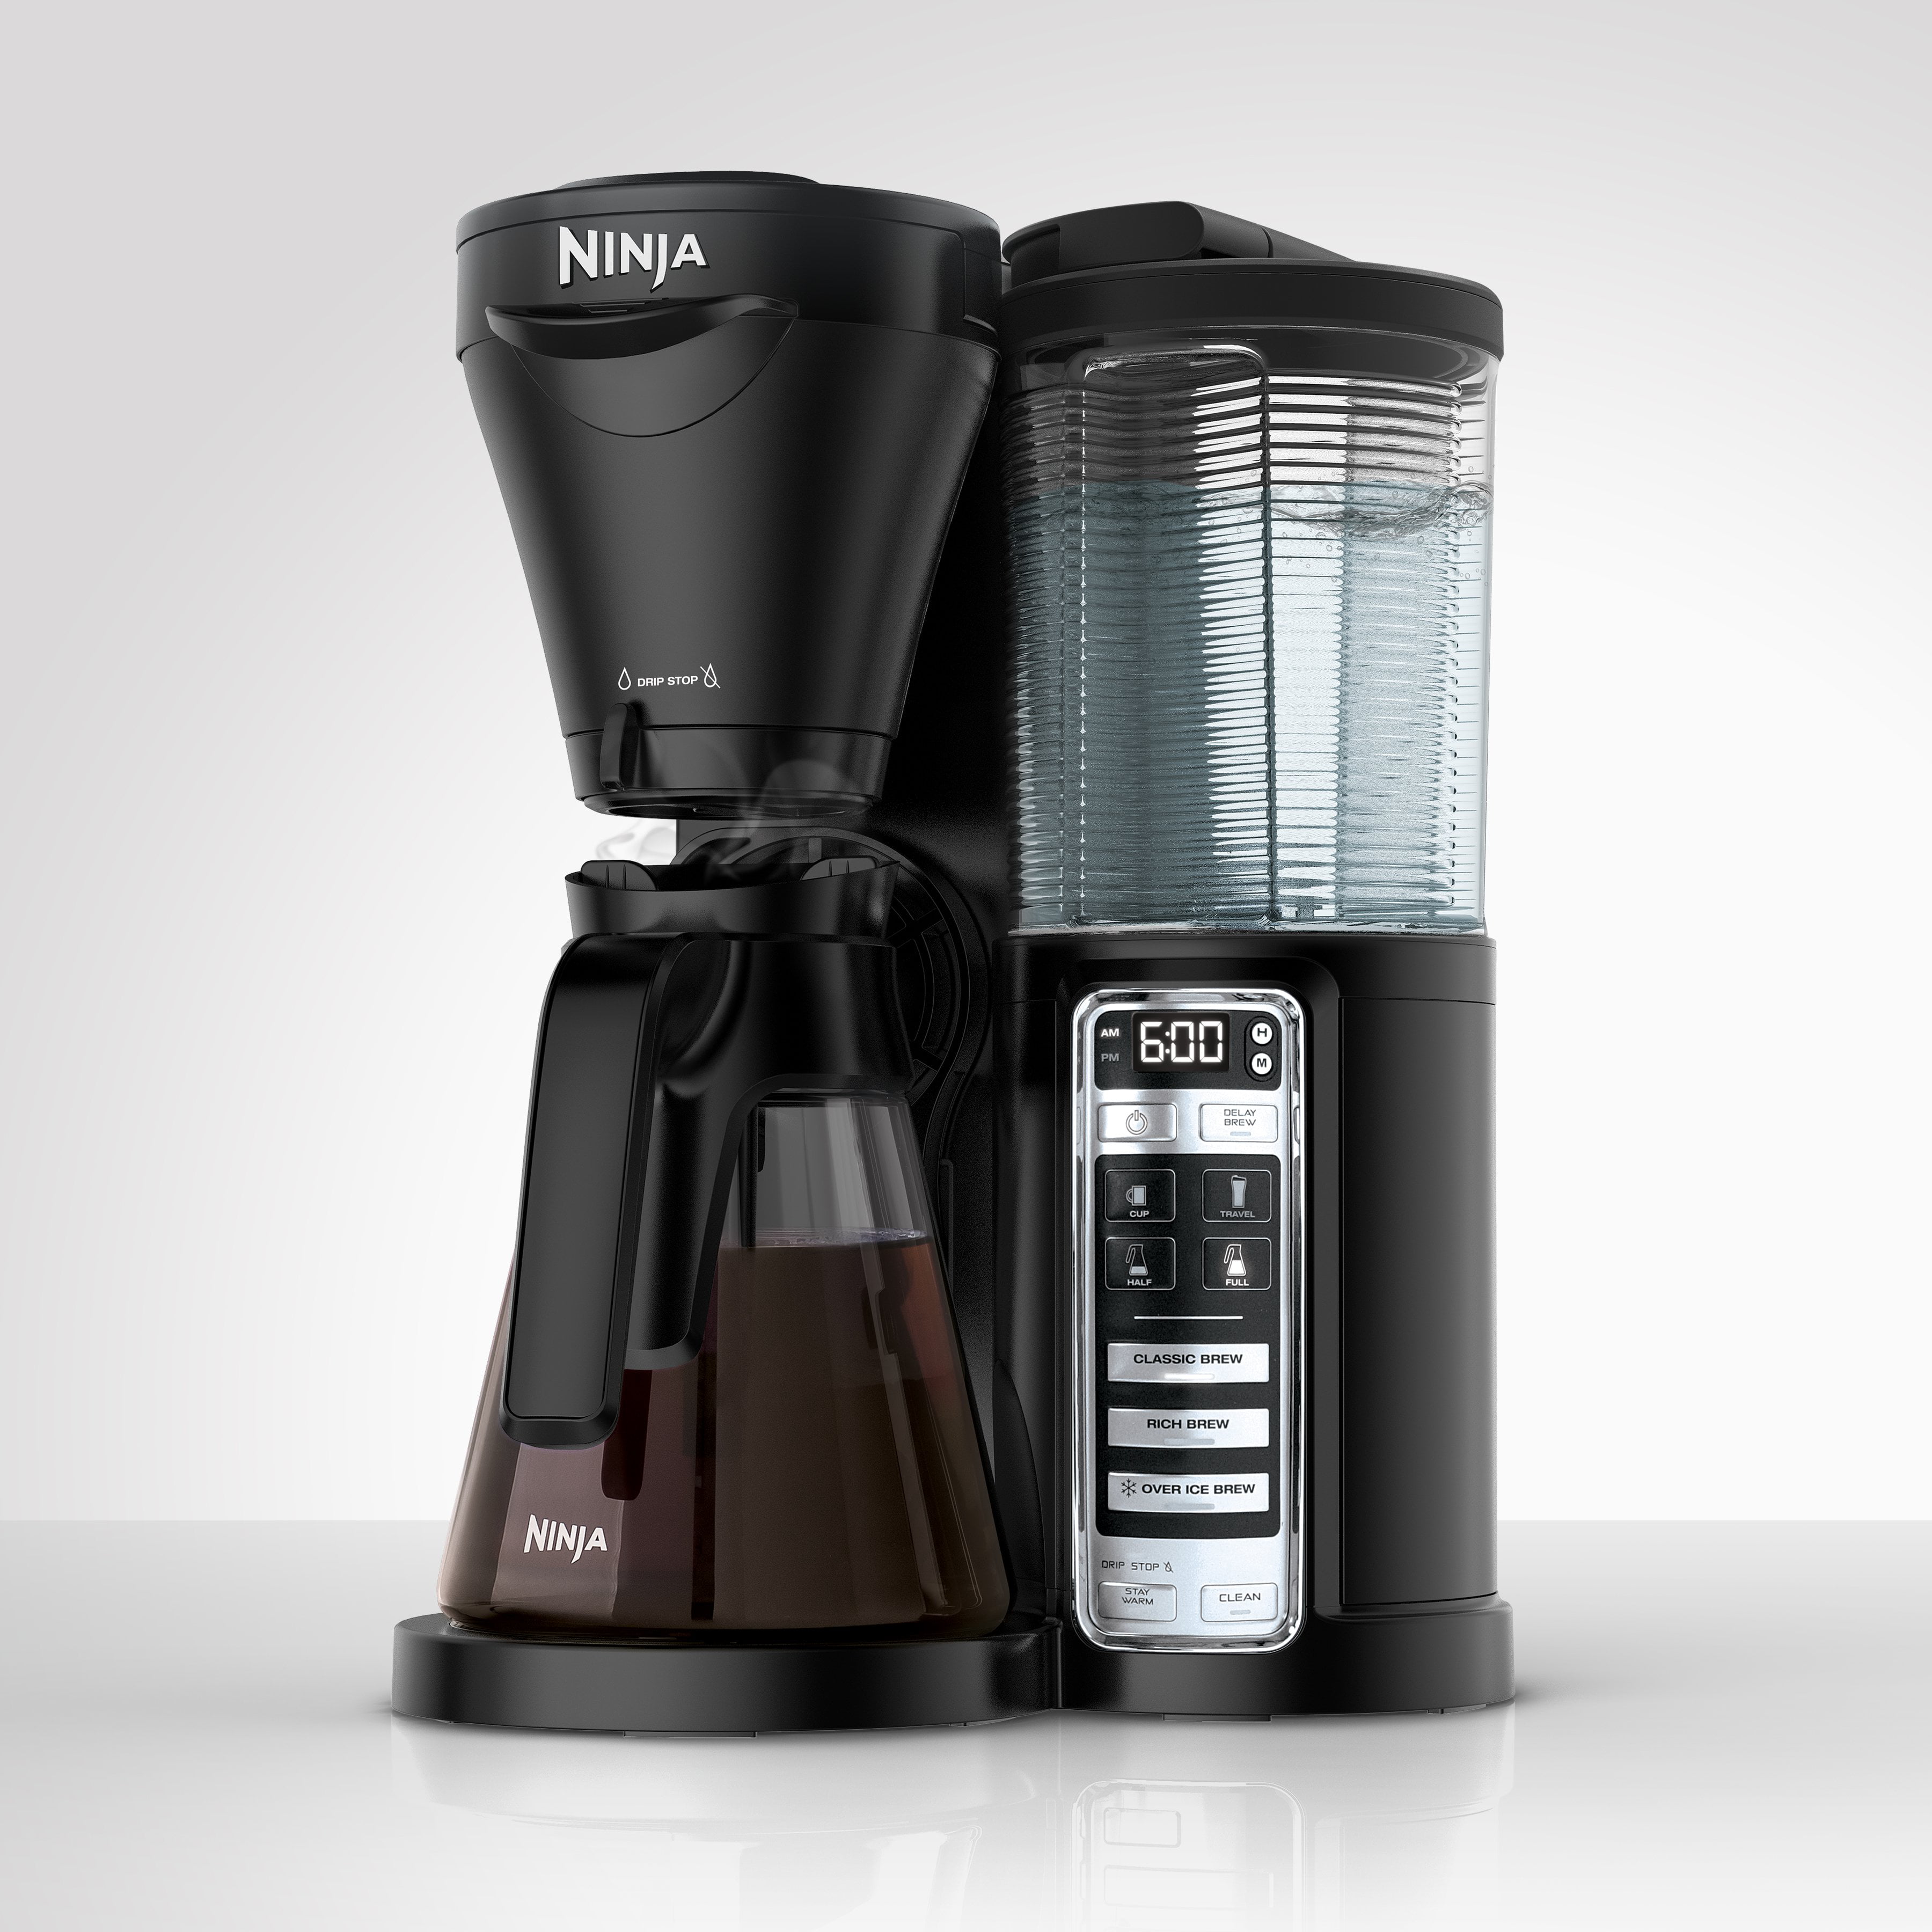 Ninja Replacement Main Unit Cfp301 DualBrew Coffee Maker K-Cup 2-Cup Drip Coffee